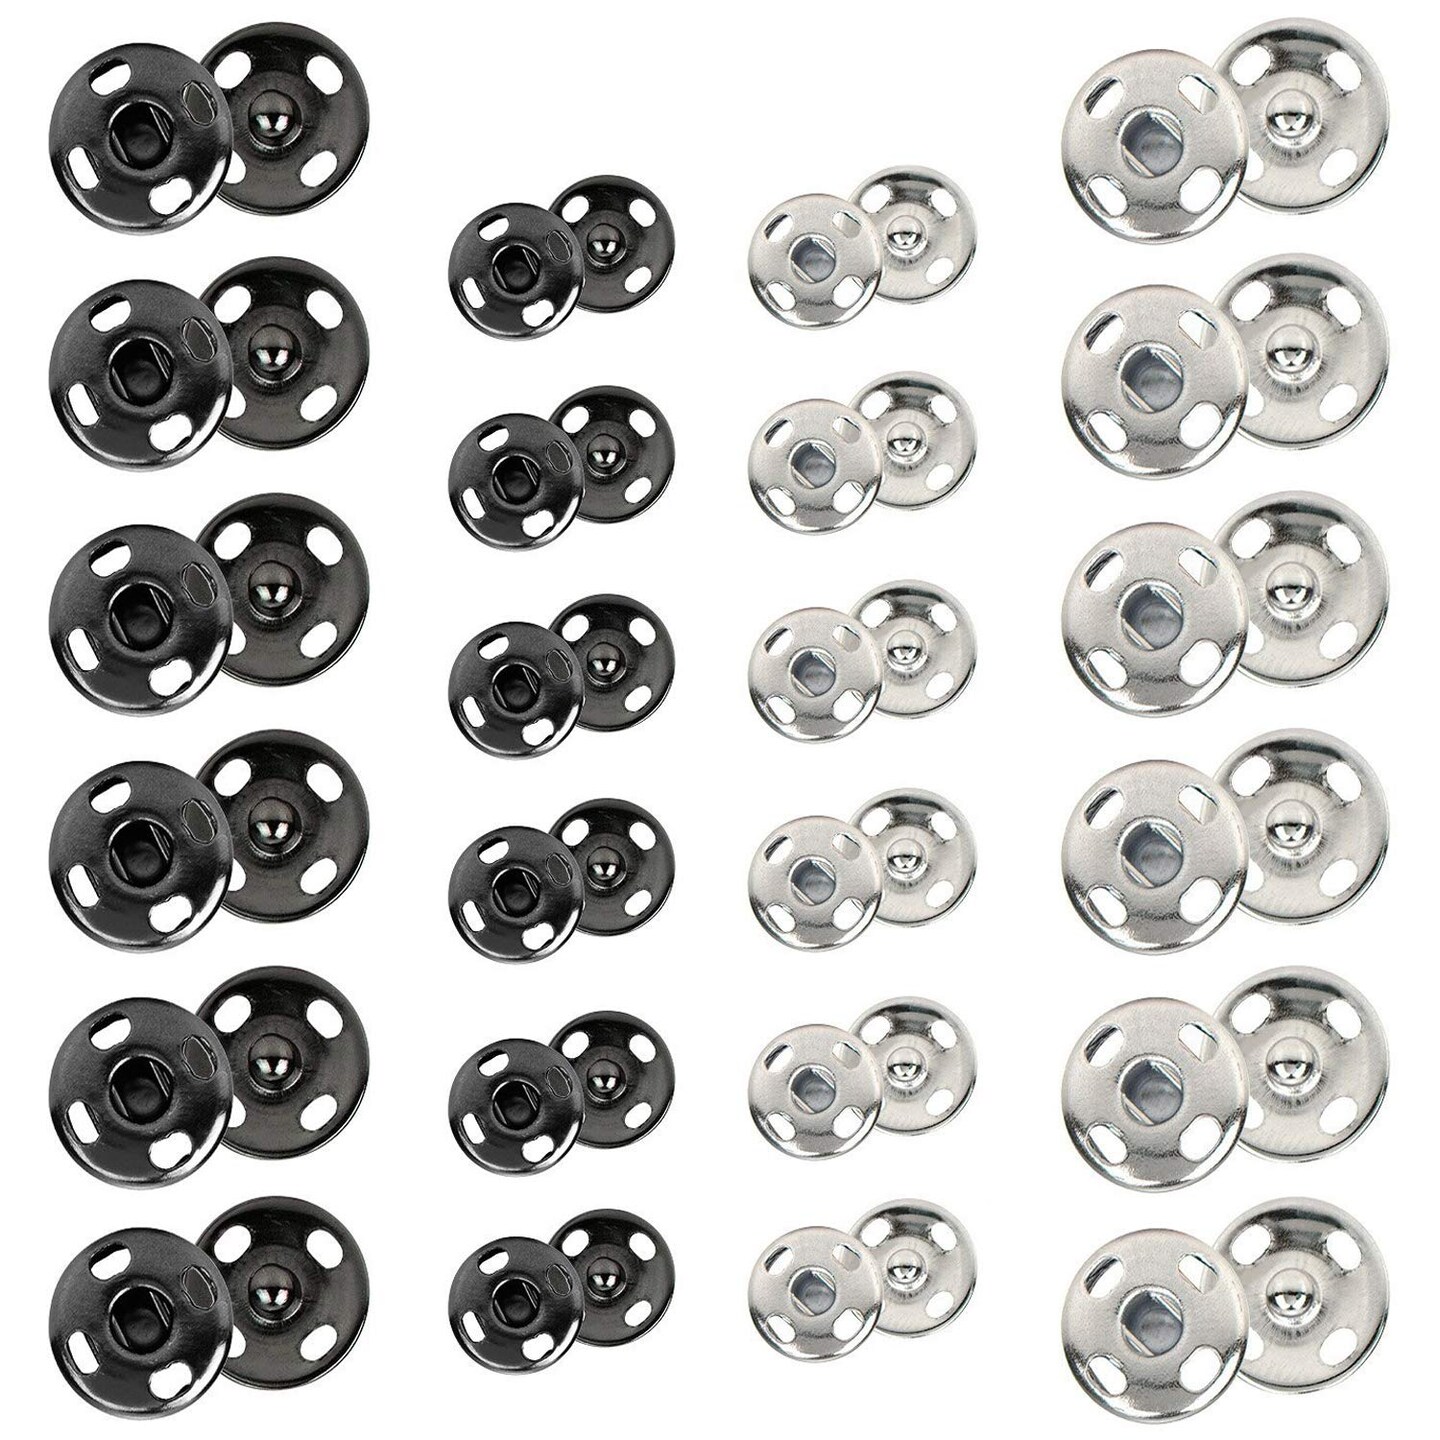 Kenkio 120 Sets Sew-on Snap Buttons Metal Snaps Fasteners Press Studs  Buttons for Sewing, 8 mm and 10 mm,Black and Silver